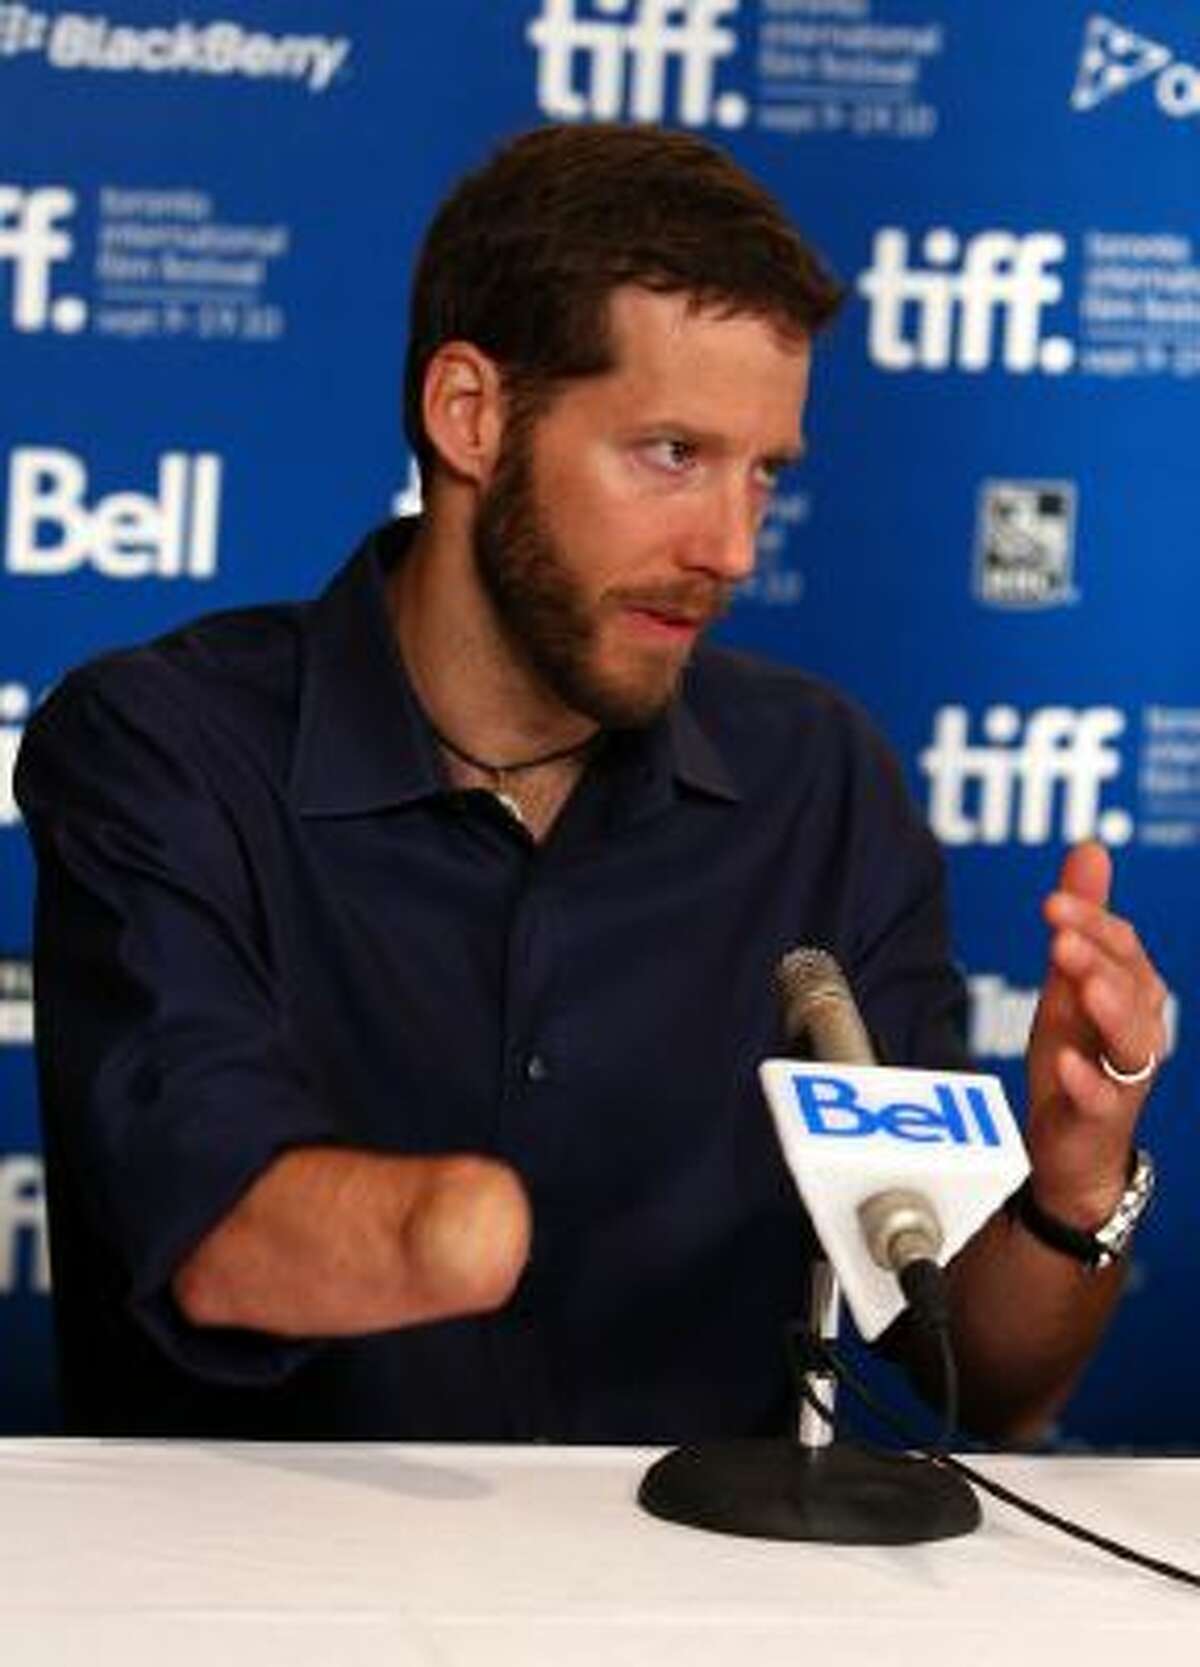 Aron Ralston speaks at "127 Hours" press conference during the 2010 Toronto International Film Festival on September 12, 2010.